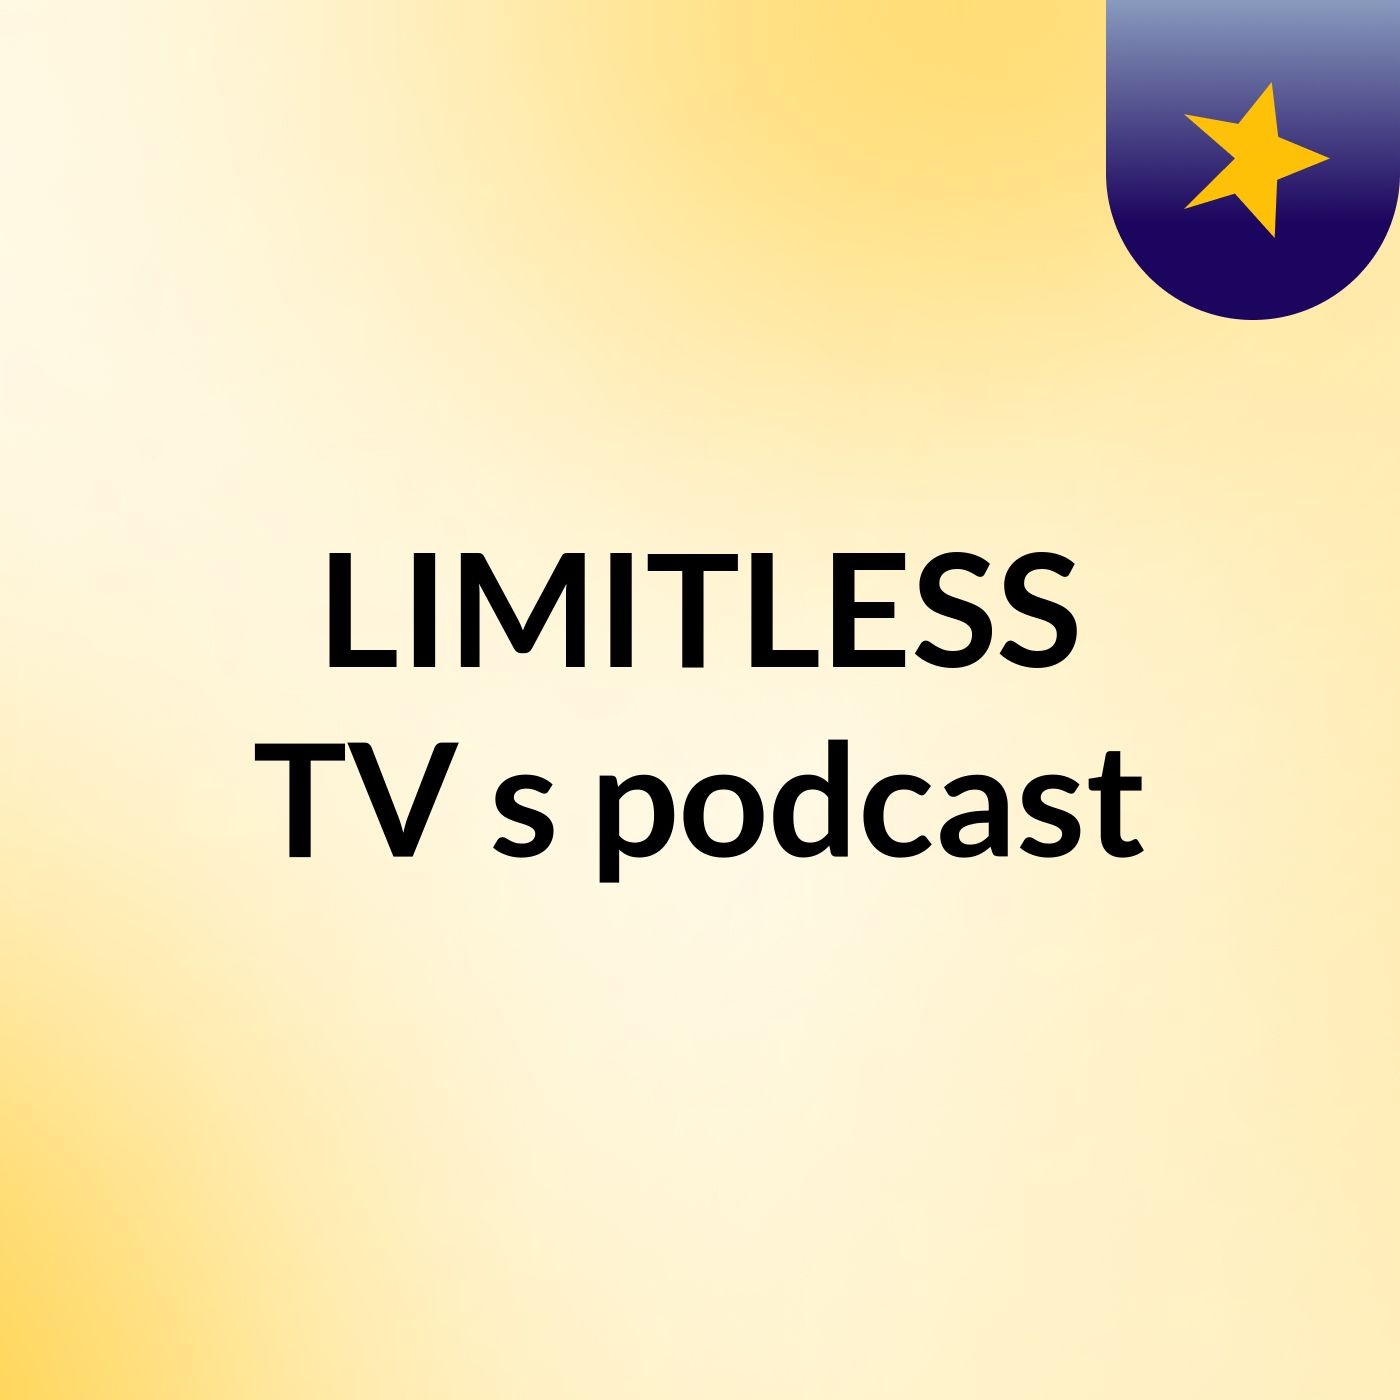 Episode 3 - LIMITLESS TV's podcast